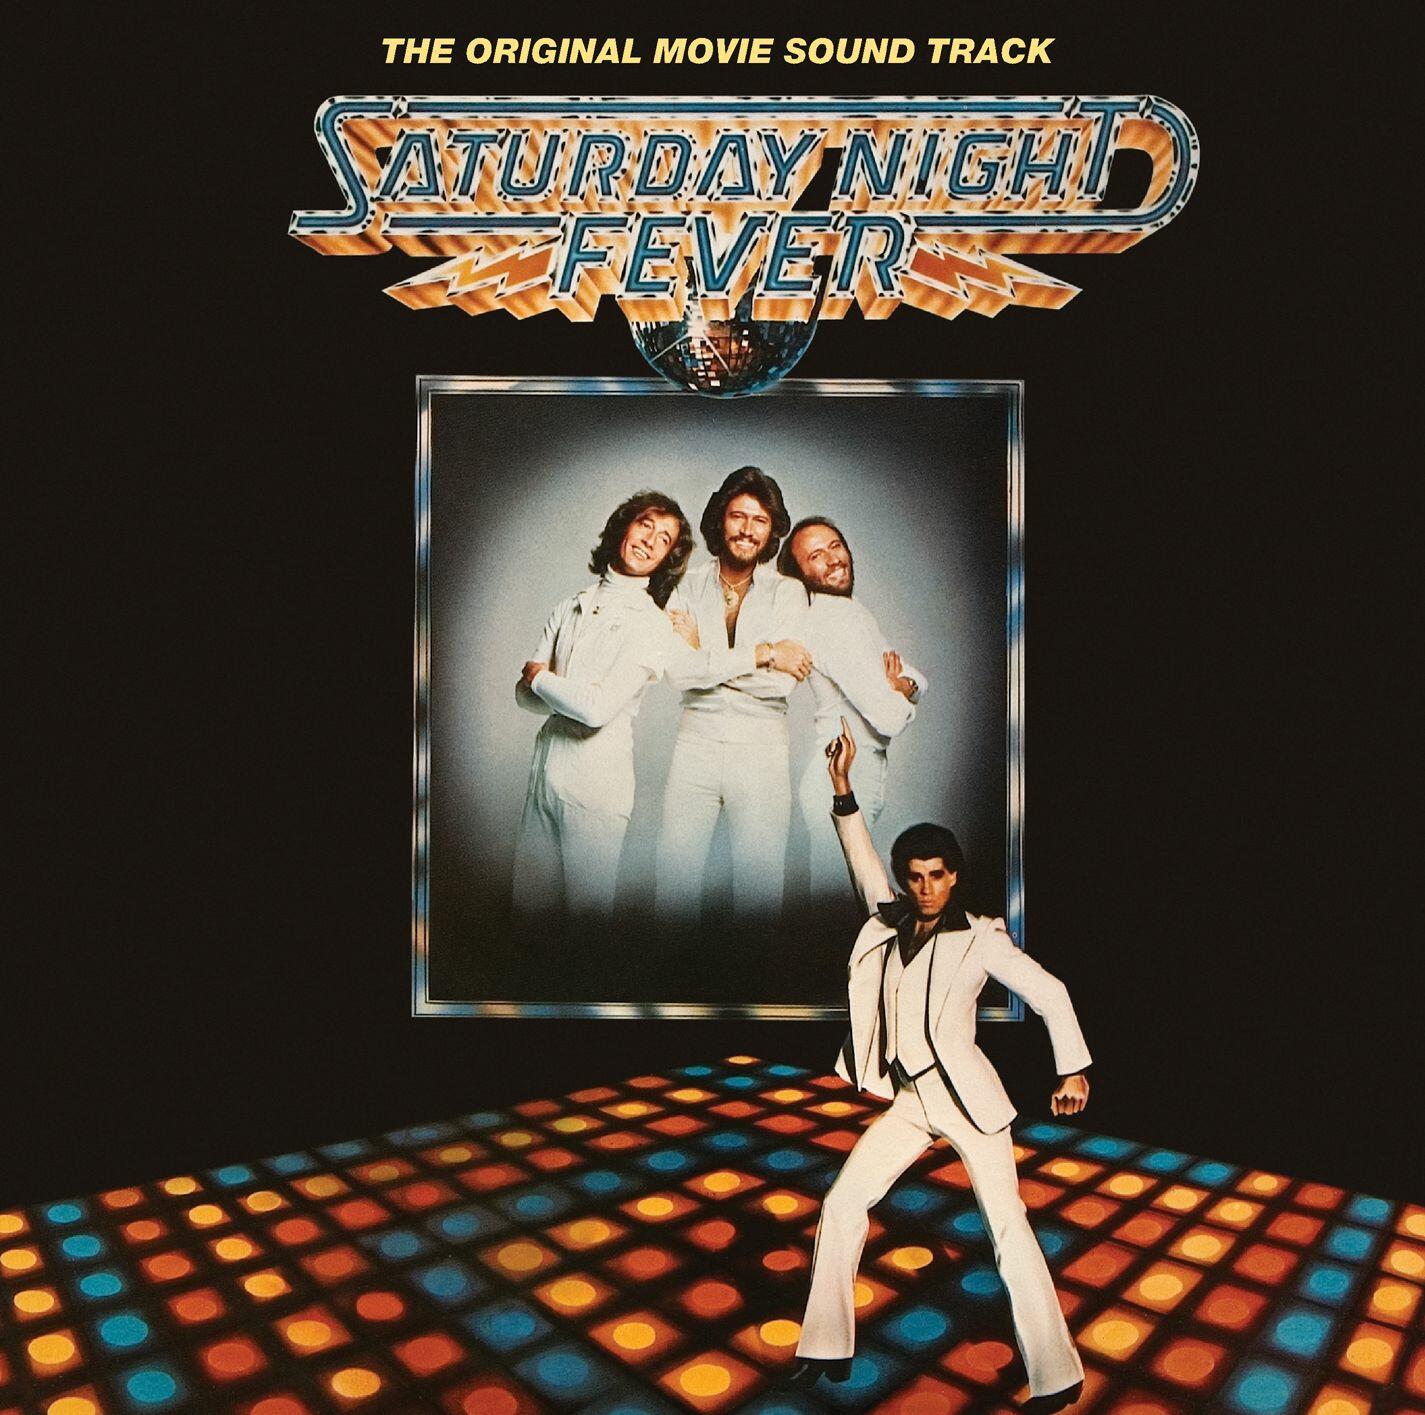 Bee Gees Saturday Night Fever [The Original Movie Soundtrack] iHeart